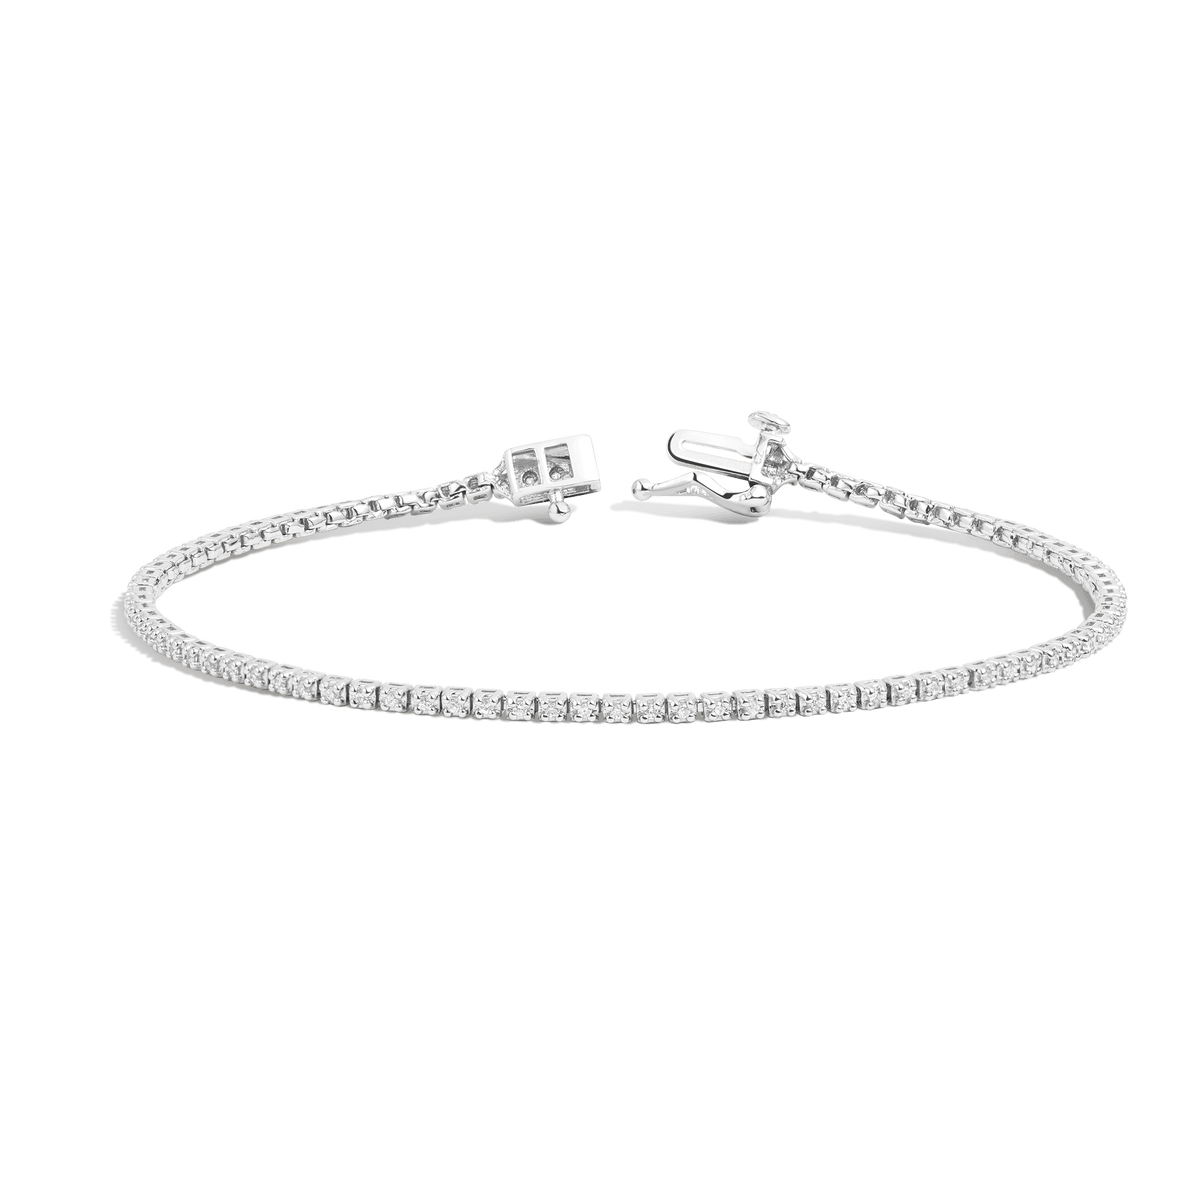 Buy PAVOI 14K Gold Plated Cubic Zirconia Classic Tennis Bracelet | Yellow  Gold Bracelets for Women | 7 Inches at Amazon.in